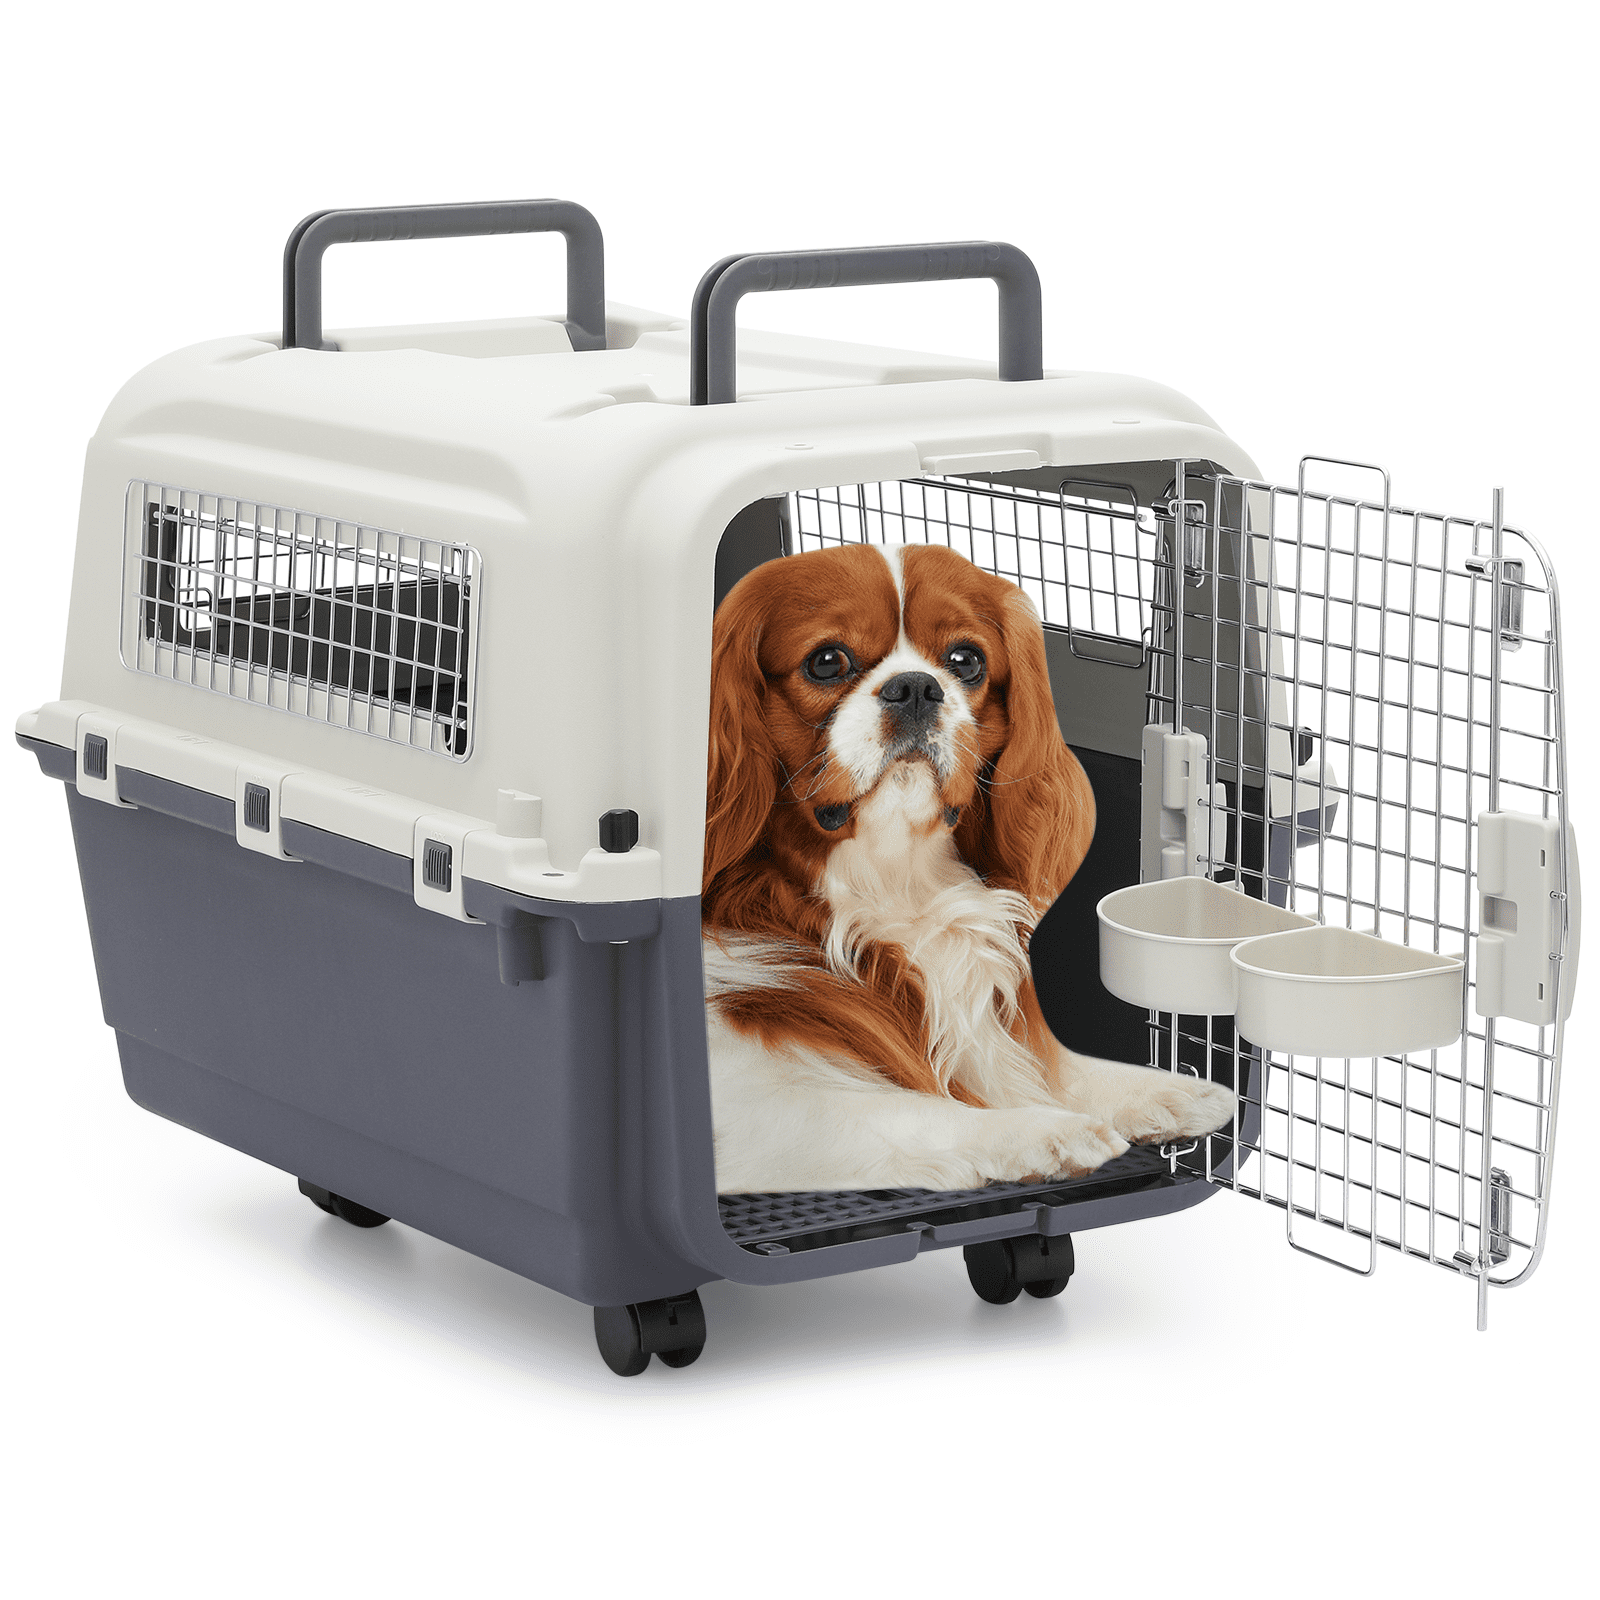 MoNiBloom 27 Pet Carrier Breathable Cage Tote Transport Box Dog Travel  Kennel with Bowls & Wheels for Cats Kitten, Airline Approved, White/Grey 